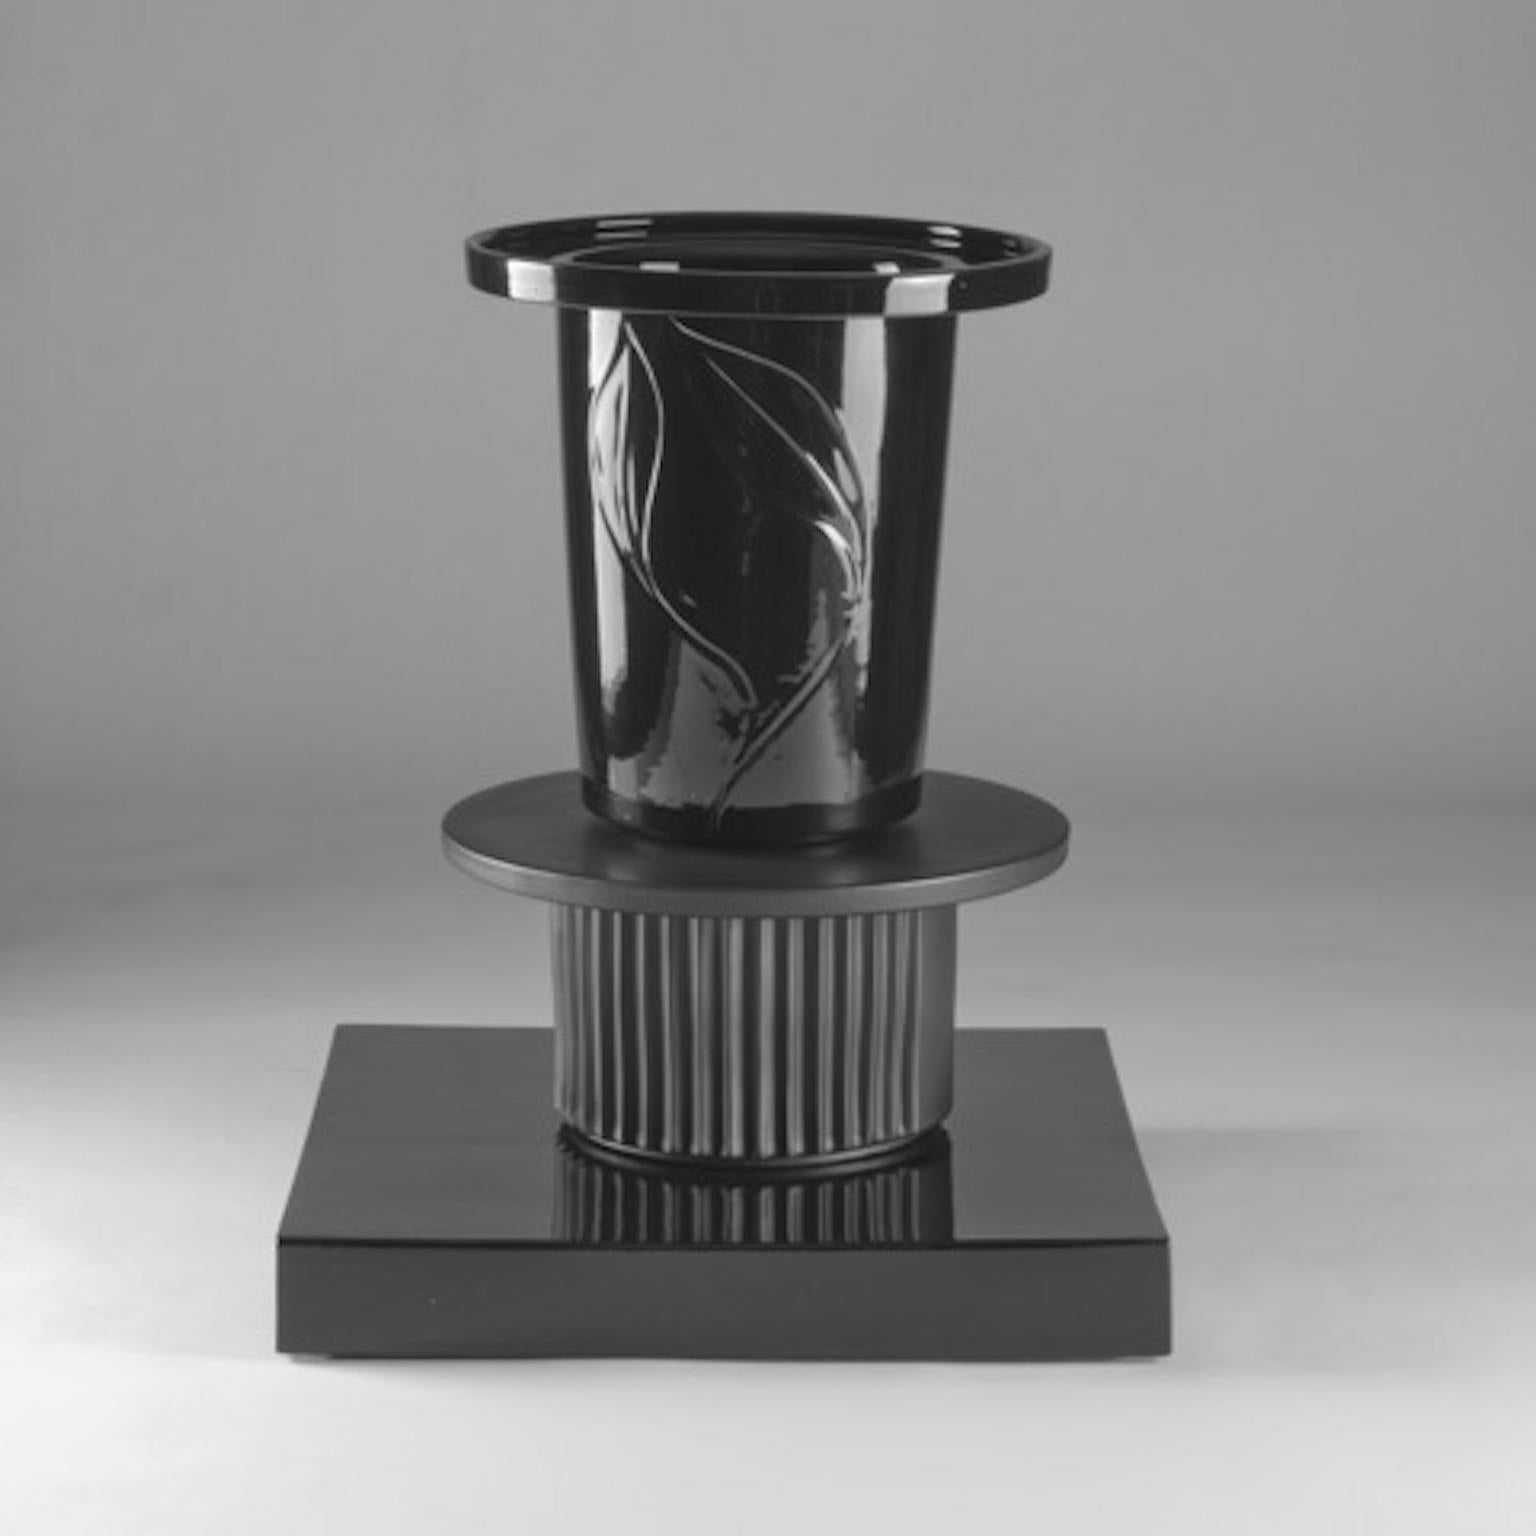 Rama ceramic vase of the collection Black&Black designed by Sergio Asti and produced by Superego Editions. Limited edition of 50 pieces. Signed and numbered.

Biography
Superego Editions was born in 2006, performing a constant activity of research